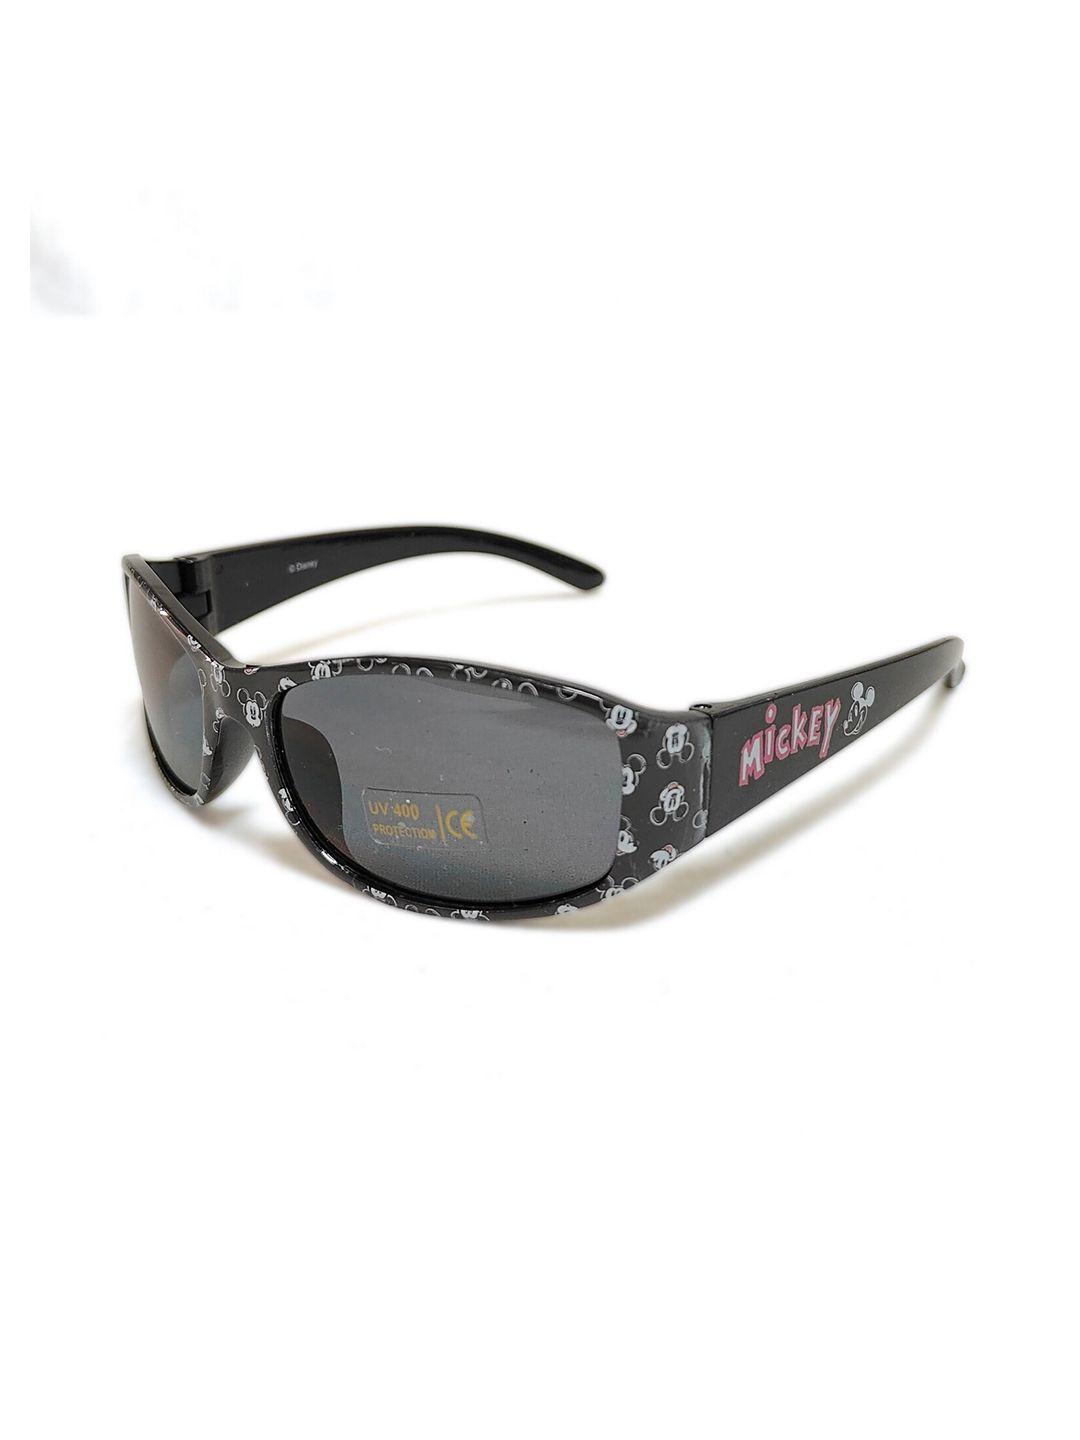 Disney Boys Grey Lens & Black Sports Sunglasses with Polarised and UV Protected Lens